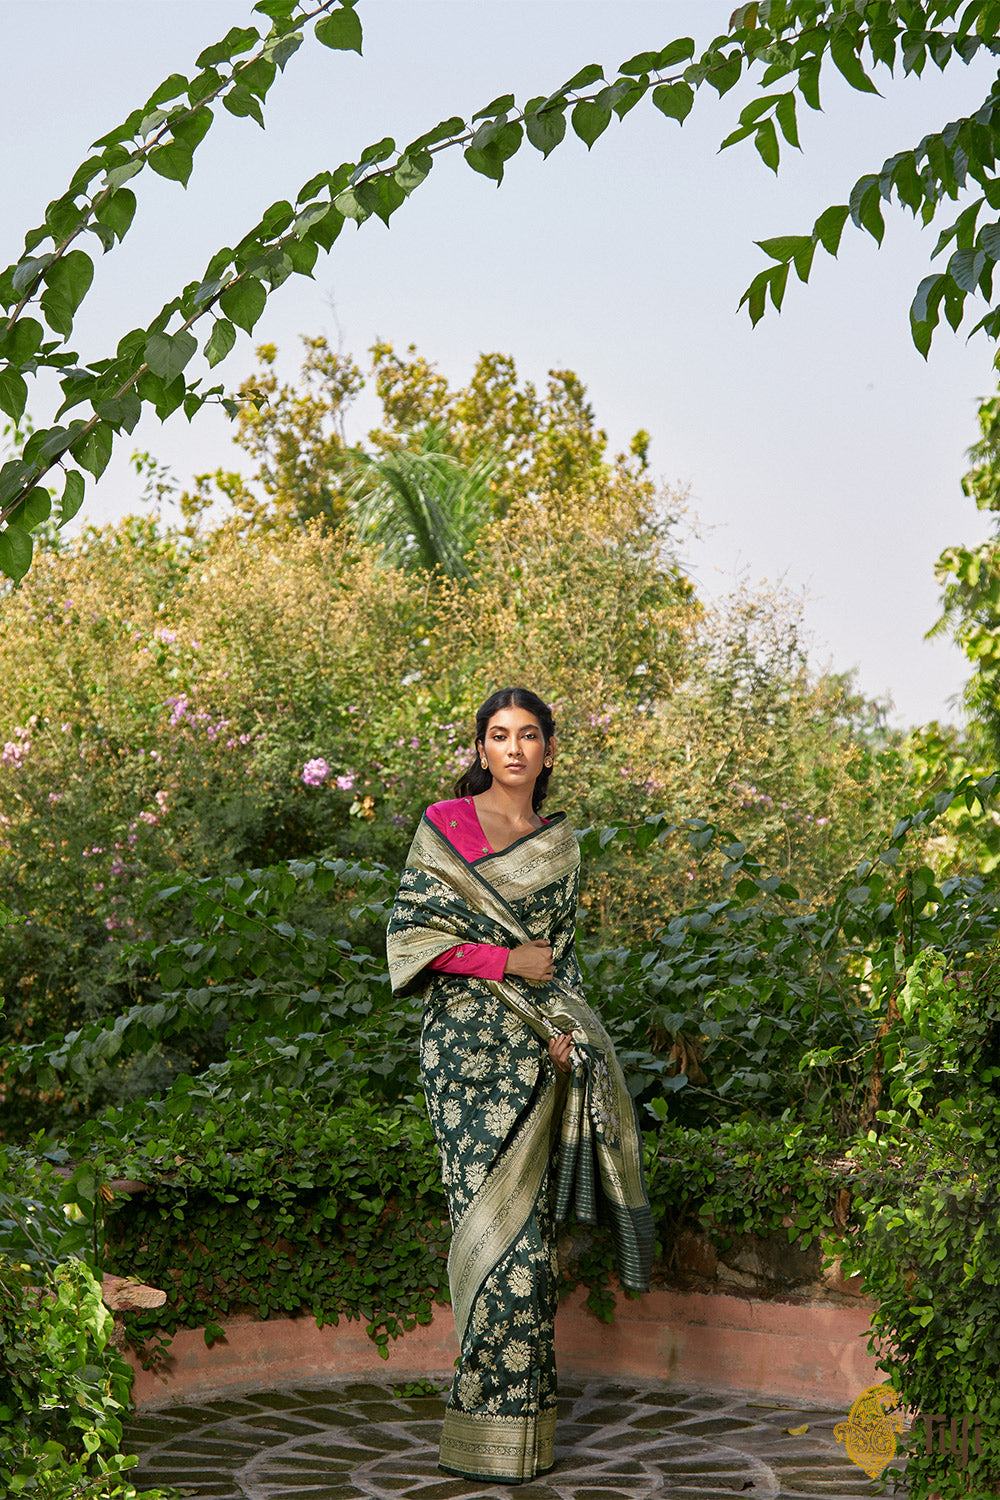 Indian-style garden with tabla and colorful sari on Craiyon